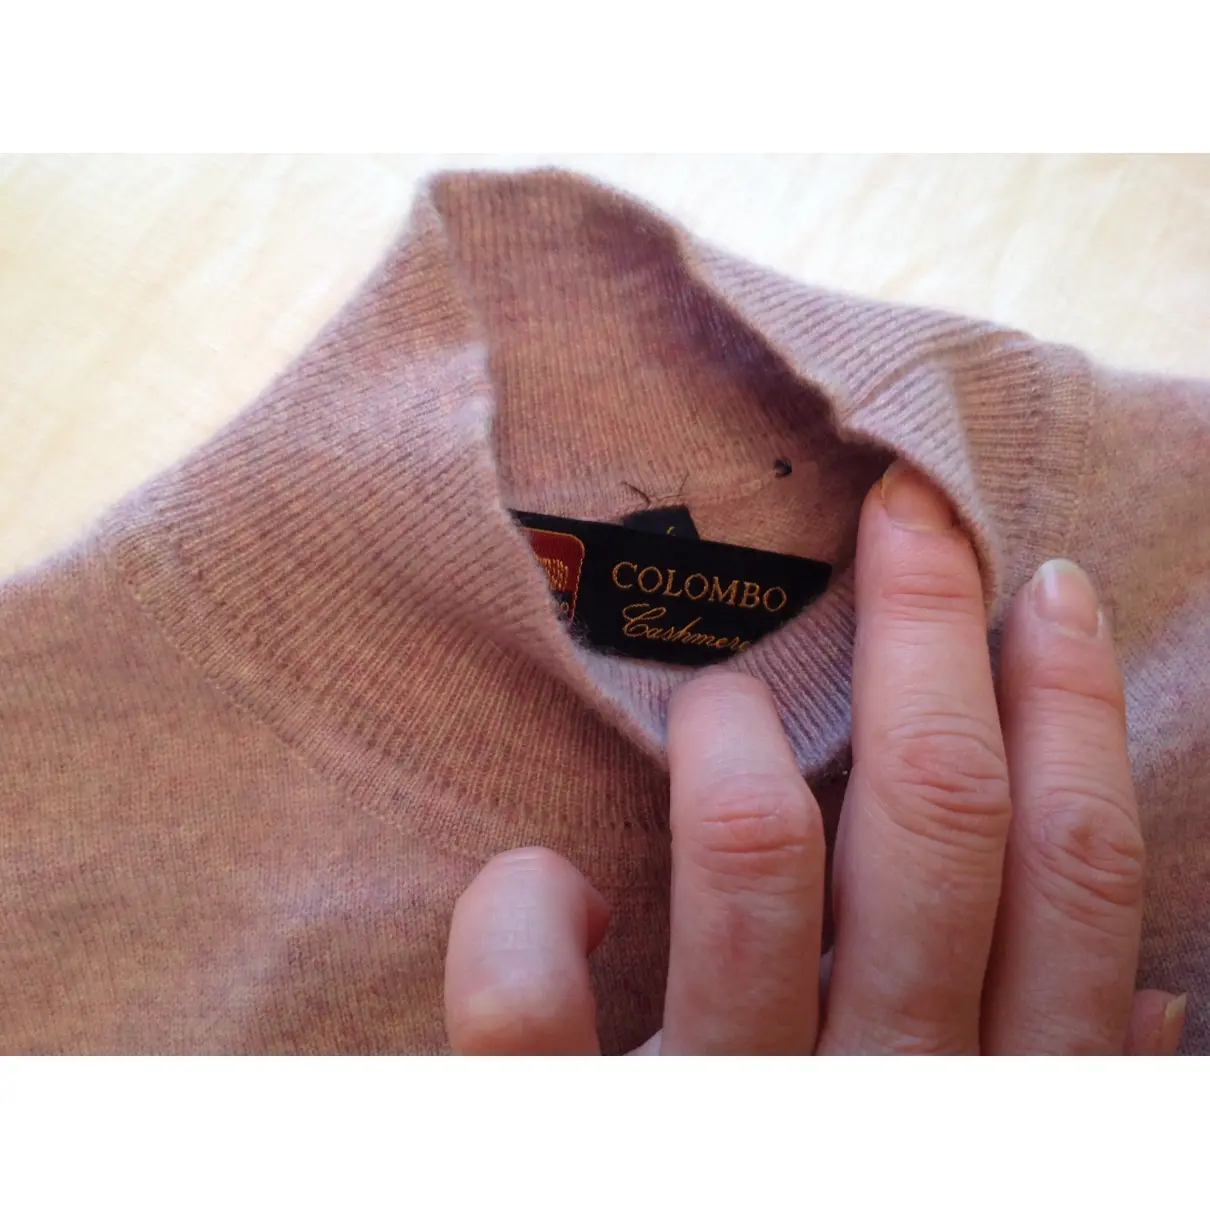 Colombo Cashmere knitwear for sale